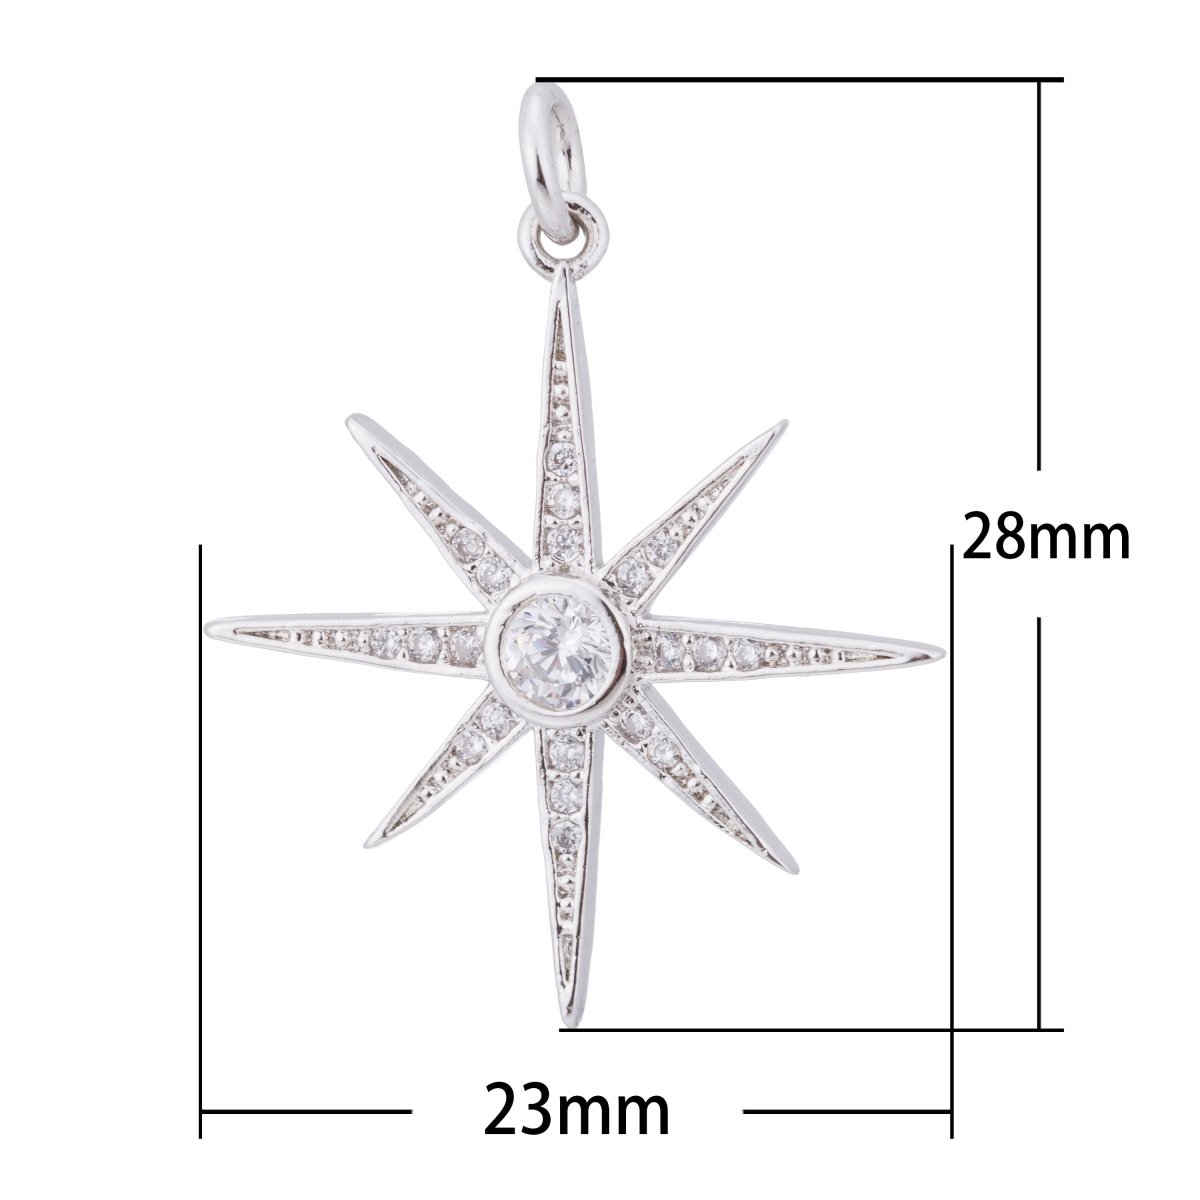 Gold, Silver Midnight Star, Starburst, Twinkle Shining Wish Dream Craft Cubic Zirconia Bracelet Charm Bead Finding Pendant For Jewelry Making C-178 - DLUXCA